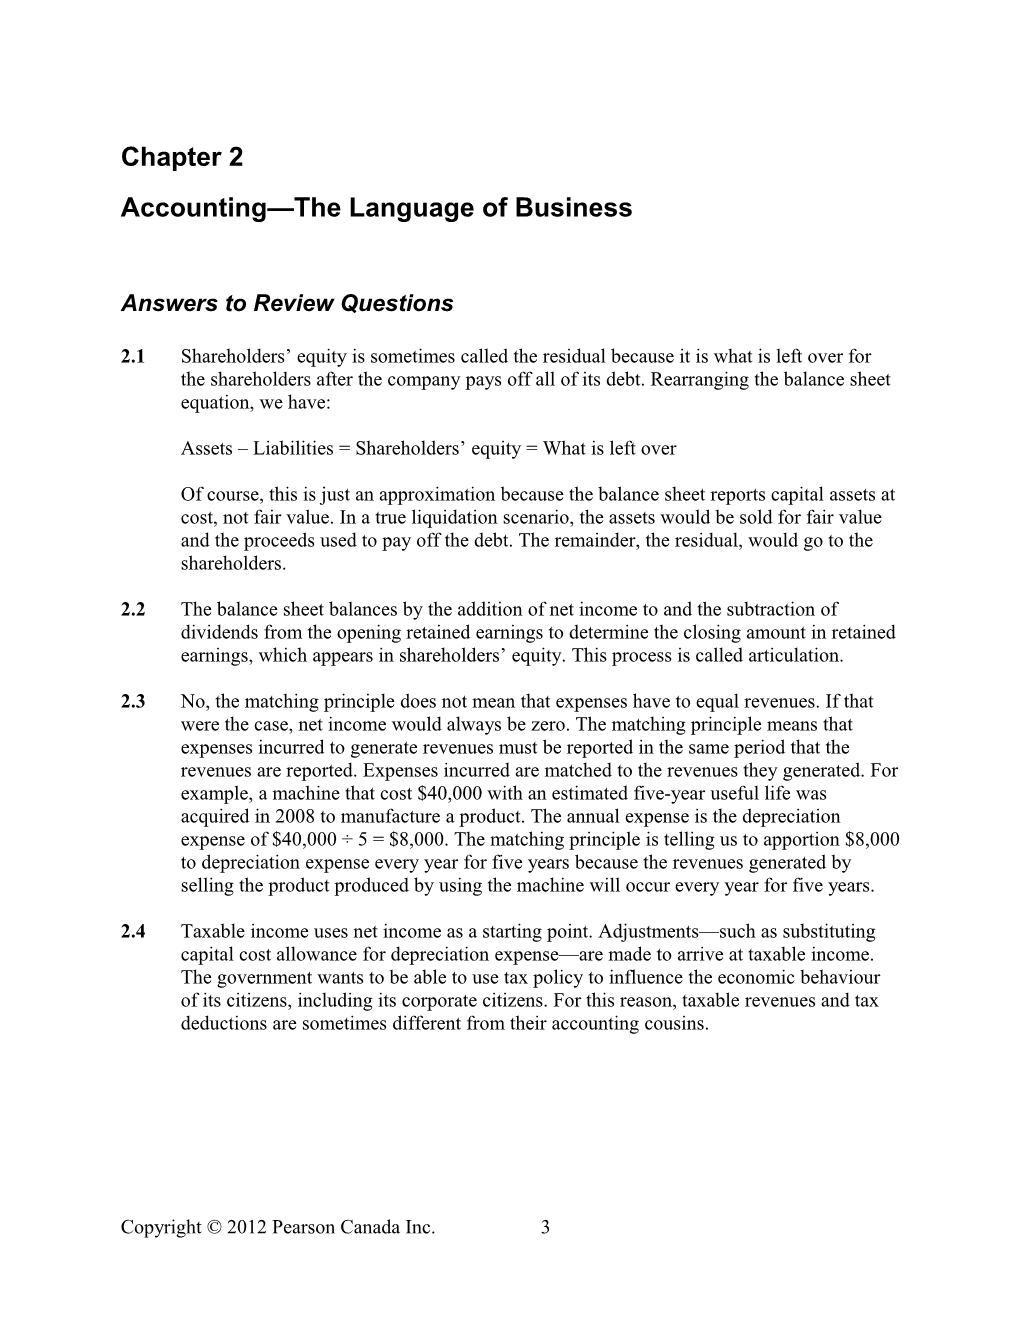 Accounting the Language of Business